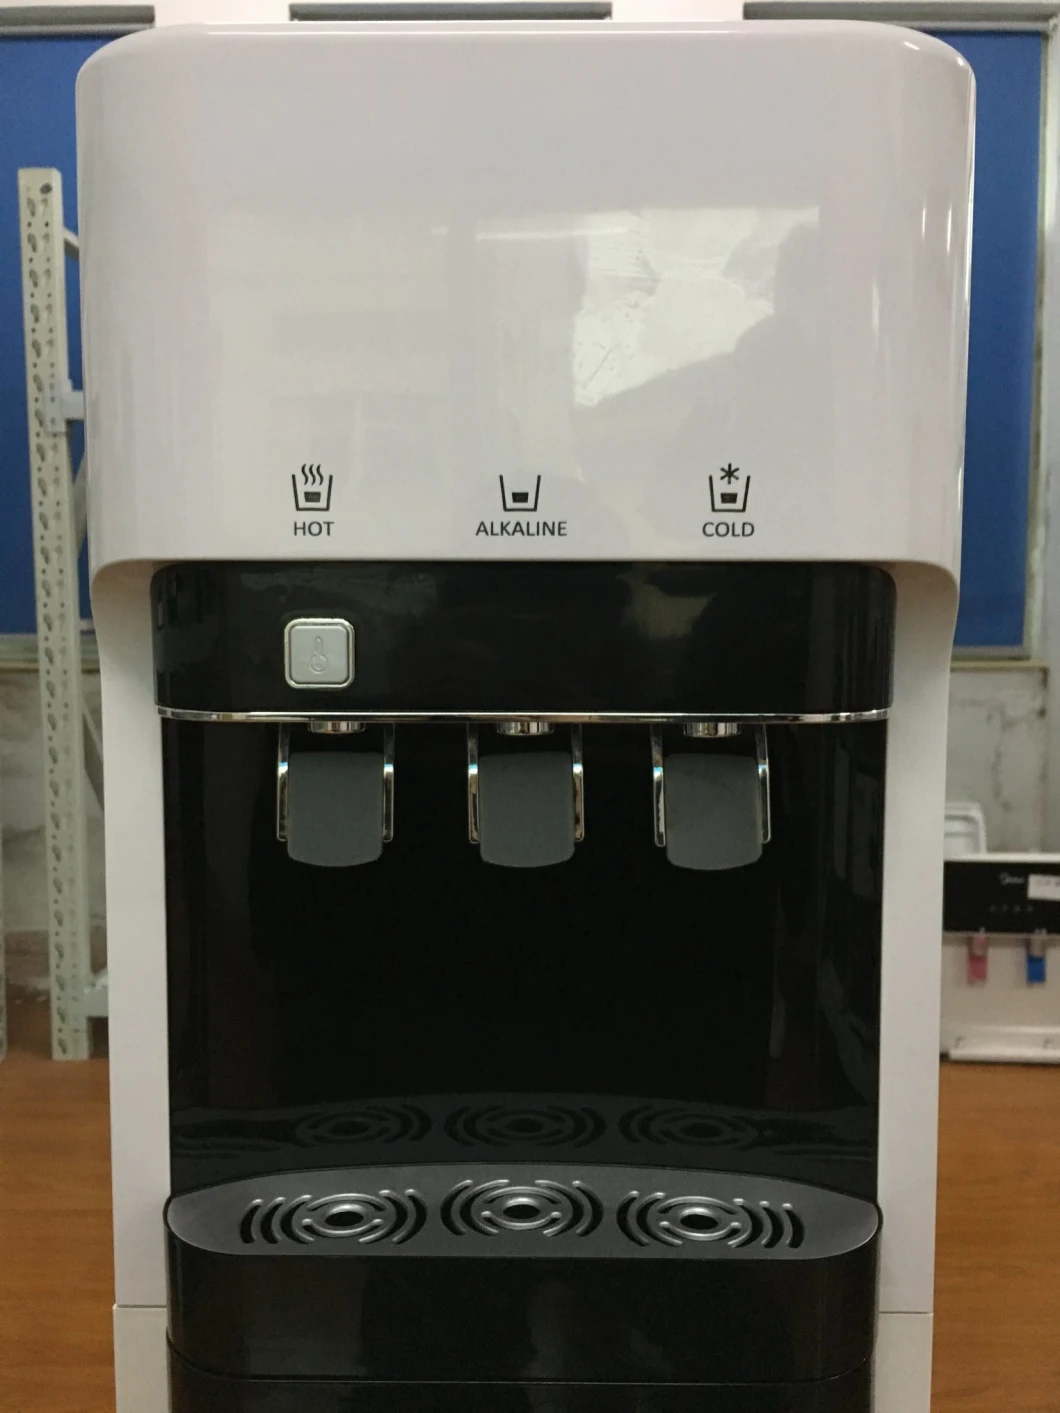 New Design Hot and Cold RO Soda Water Maker Machine Water Purifier Filter System Water Dispenser